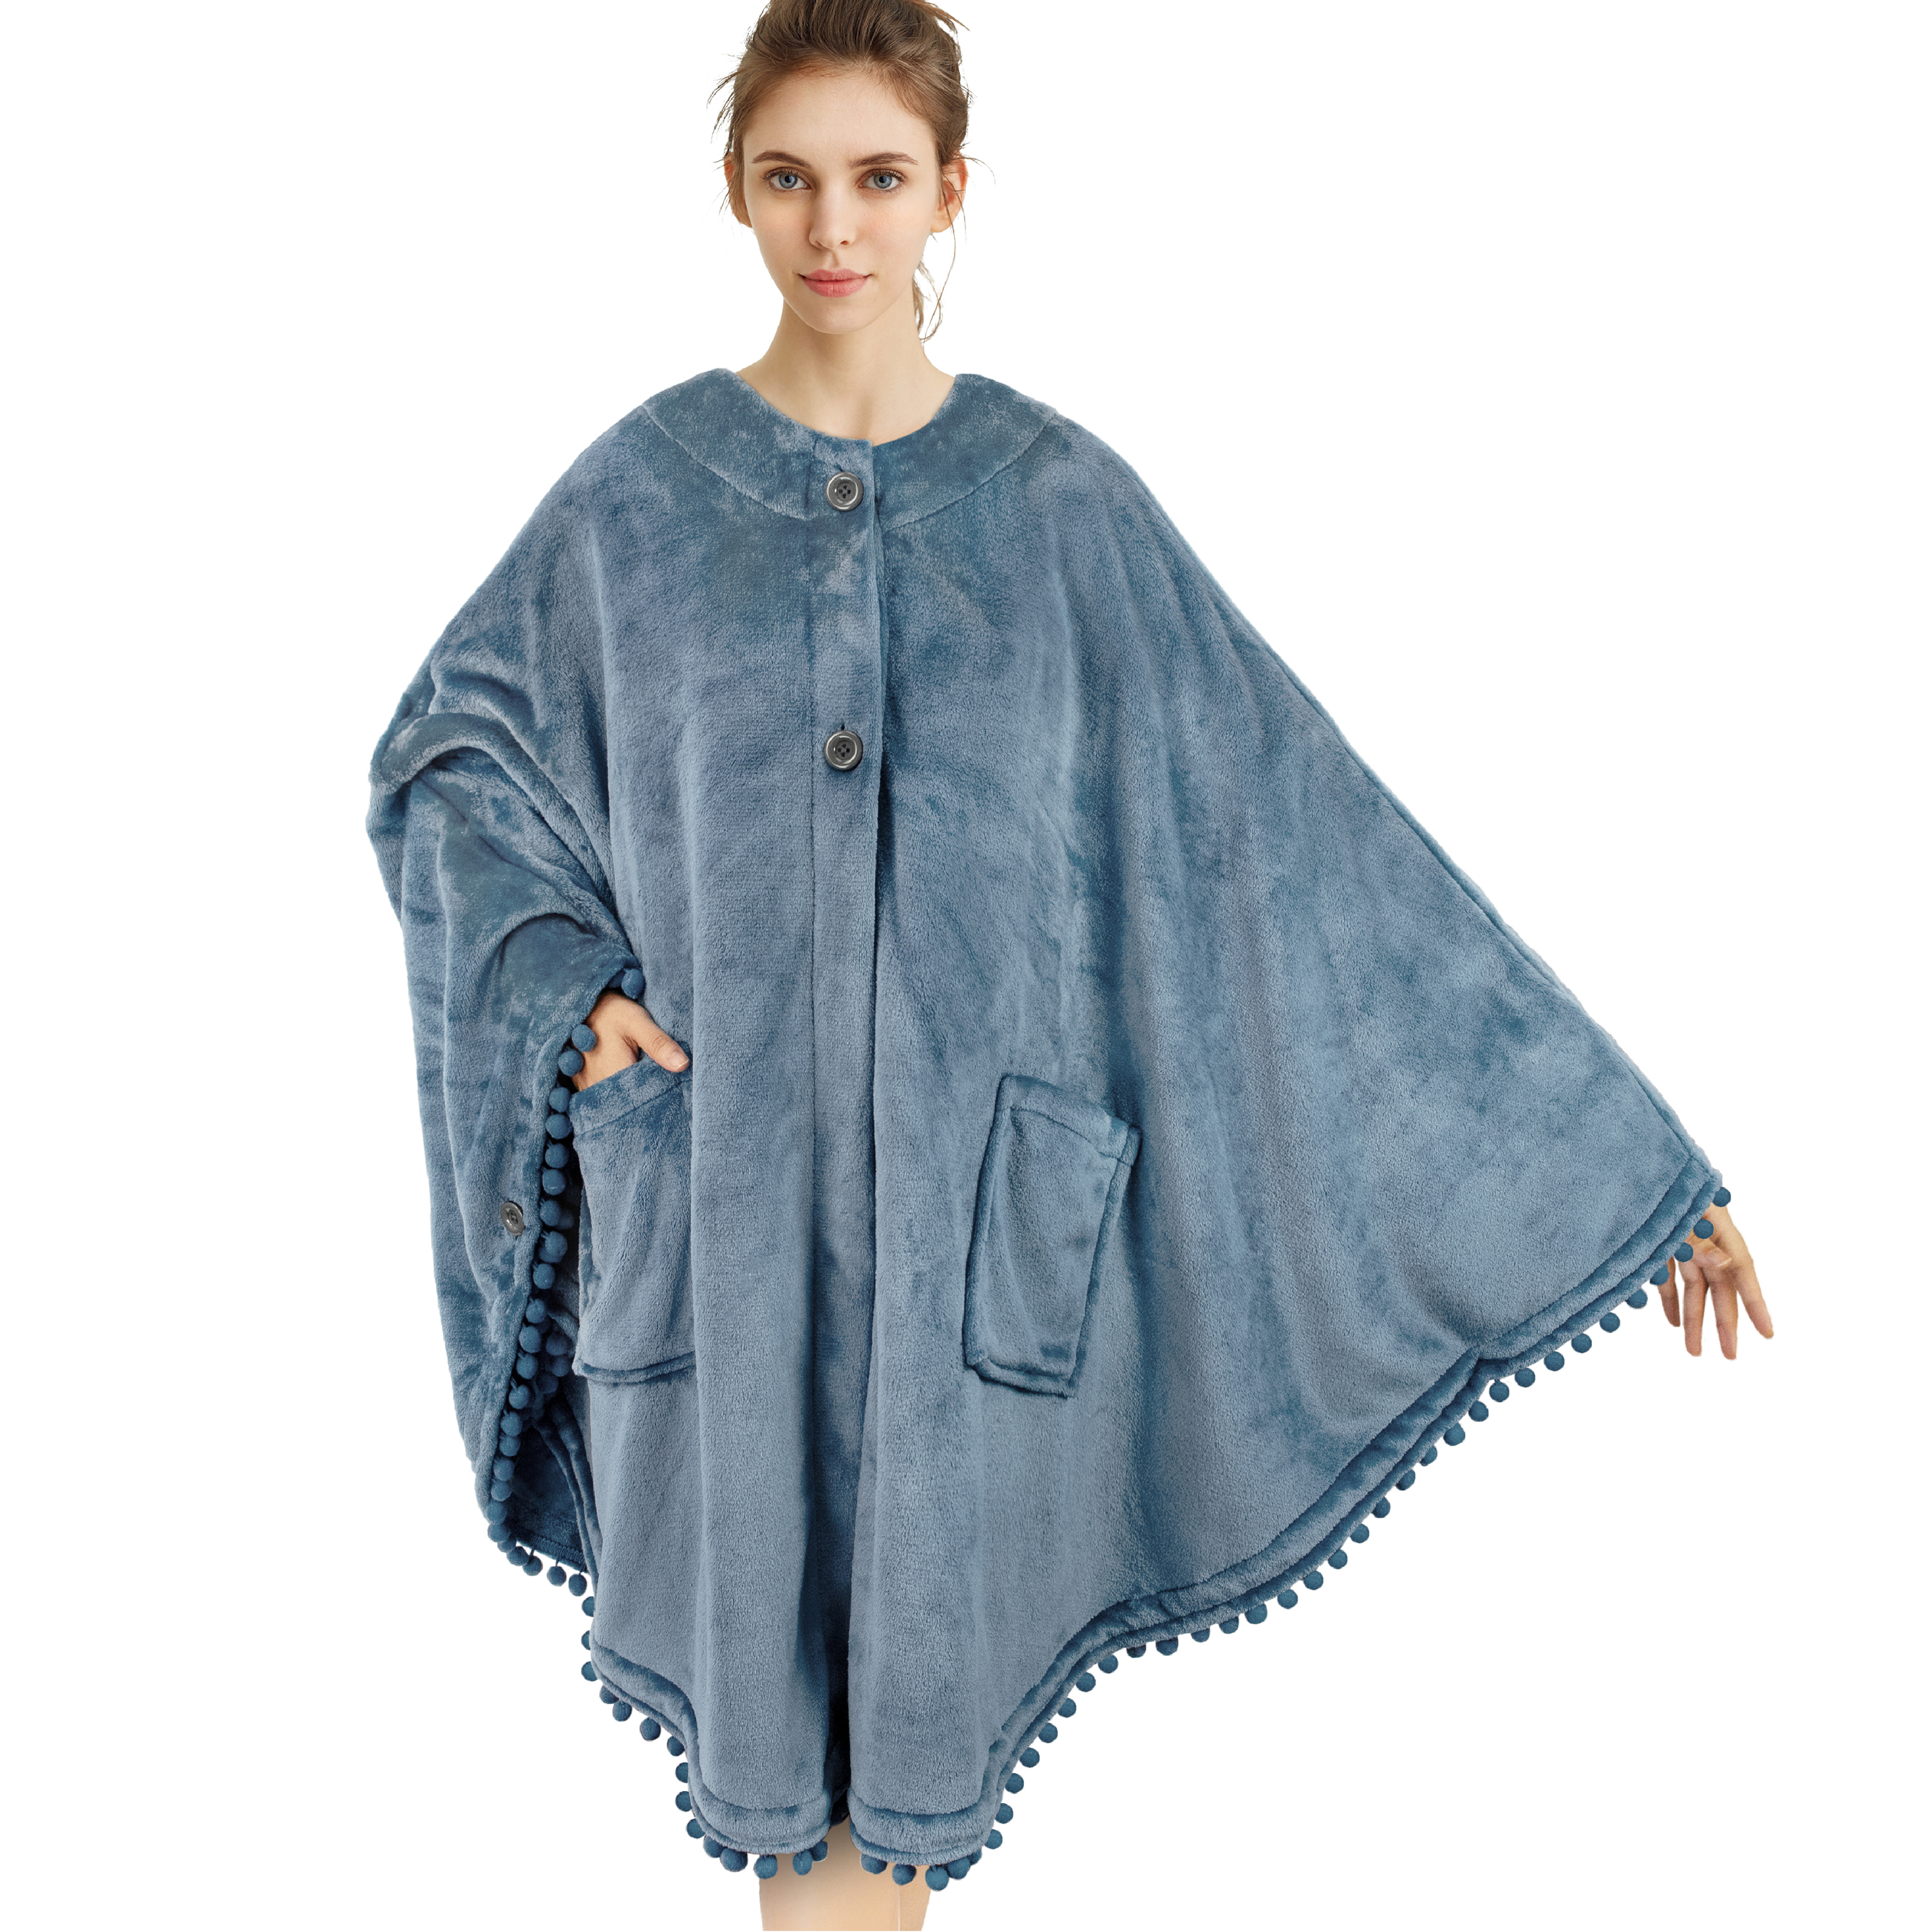 Soft and Luxurious Fringed Shoulder WrapShawl with Button closure Shawl Wrap